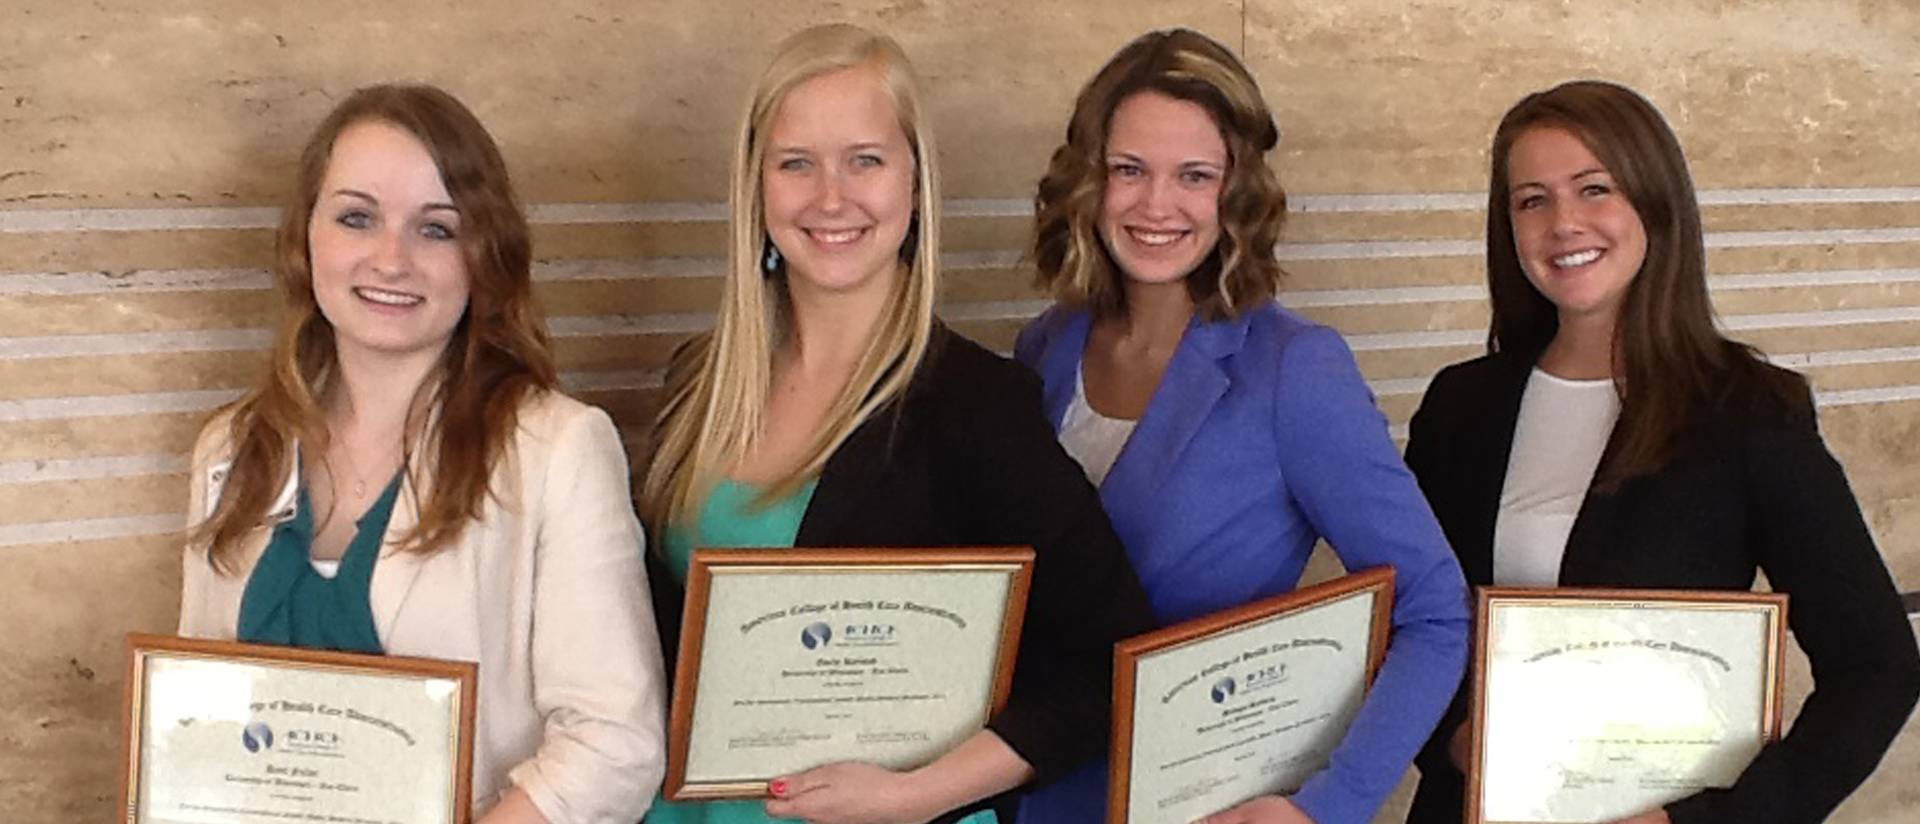 UW-Eau Claire HCAD students (from l to r) Ariel Fuller, Emily Kjelstad, Bridget Staberg, and Lori Mahan are recognized for their research posters at the 48th Annual ACHCA Convocation and Exposition and Student Poster Session in Las Vegas, NV, April 5–9, 2